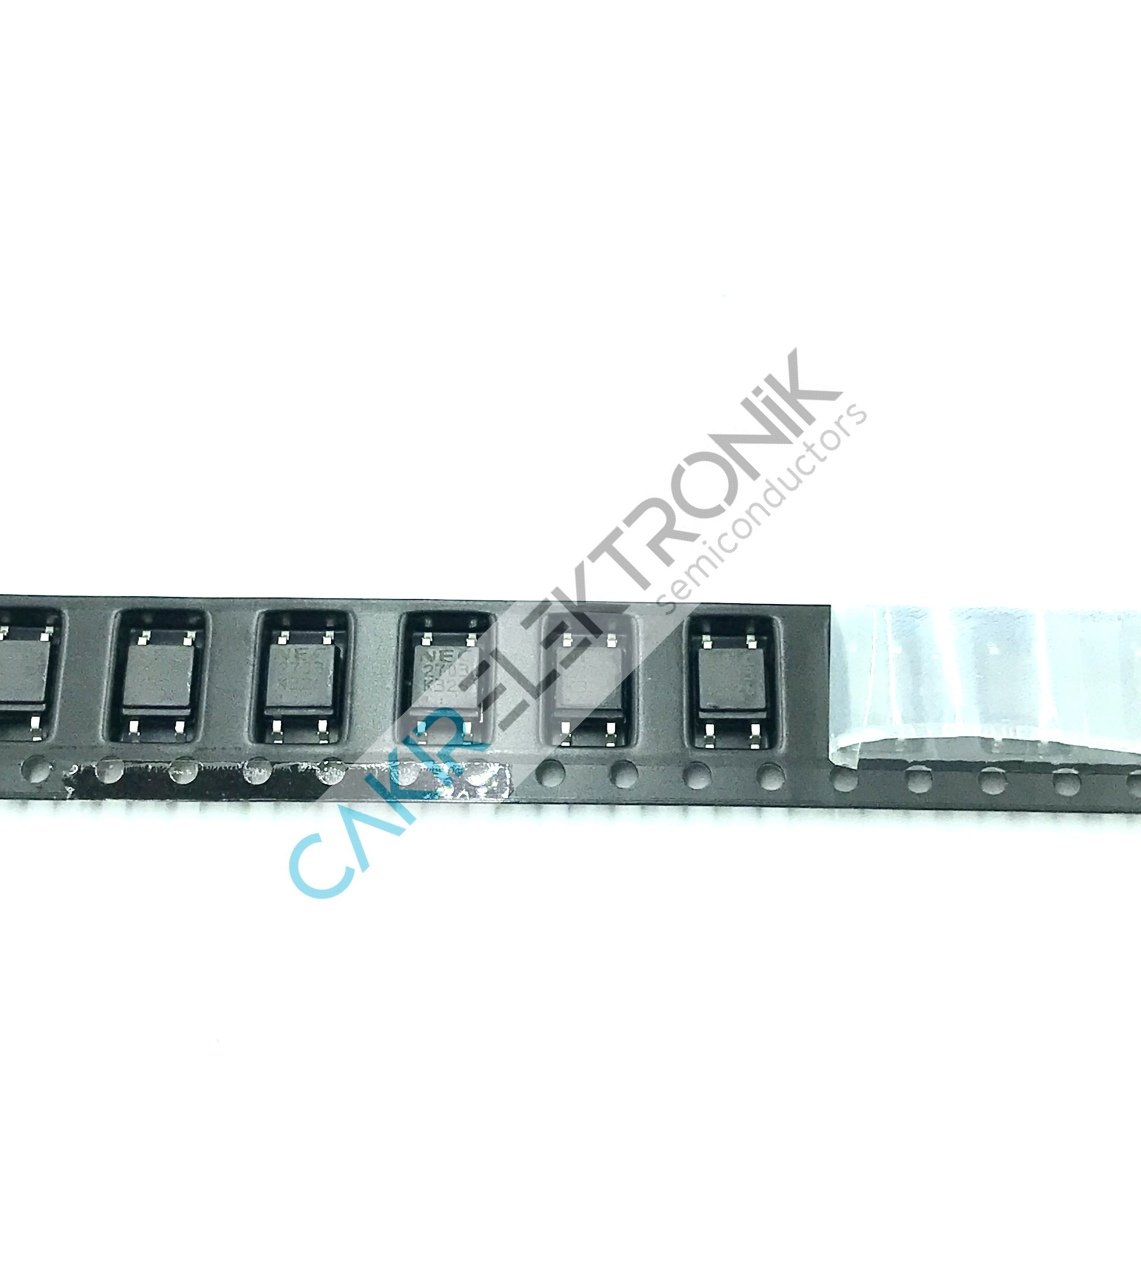 PS2703-1-F3-A - PS2703-1 - HIGH ISOLATION VOLTAGE, HIGH COLLECTOR TO EMITTER VOLTAGE TYPE SOP MULTI PHOTOCOUPLER SERIES